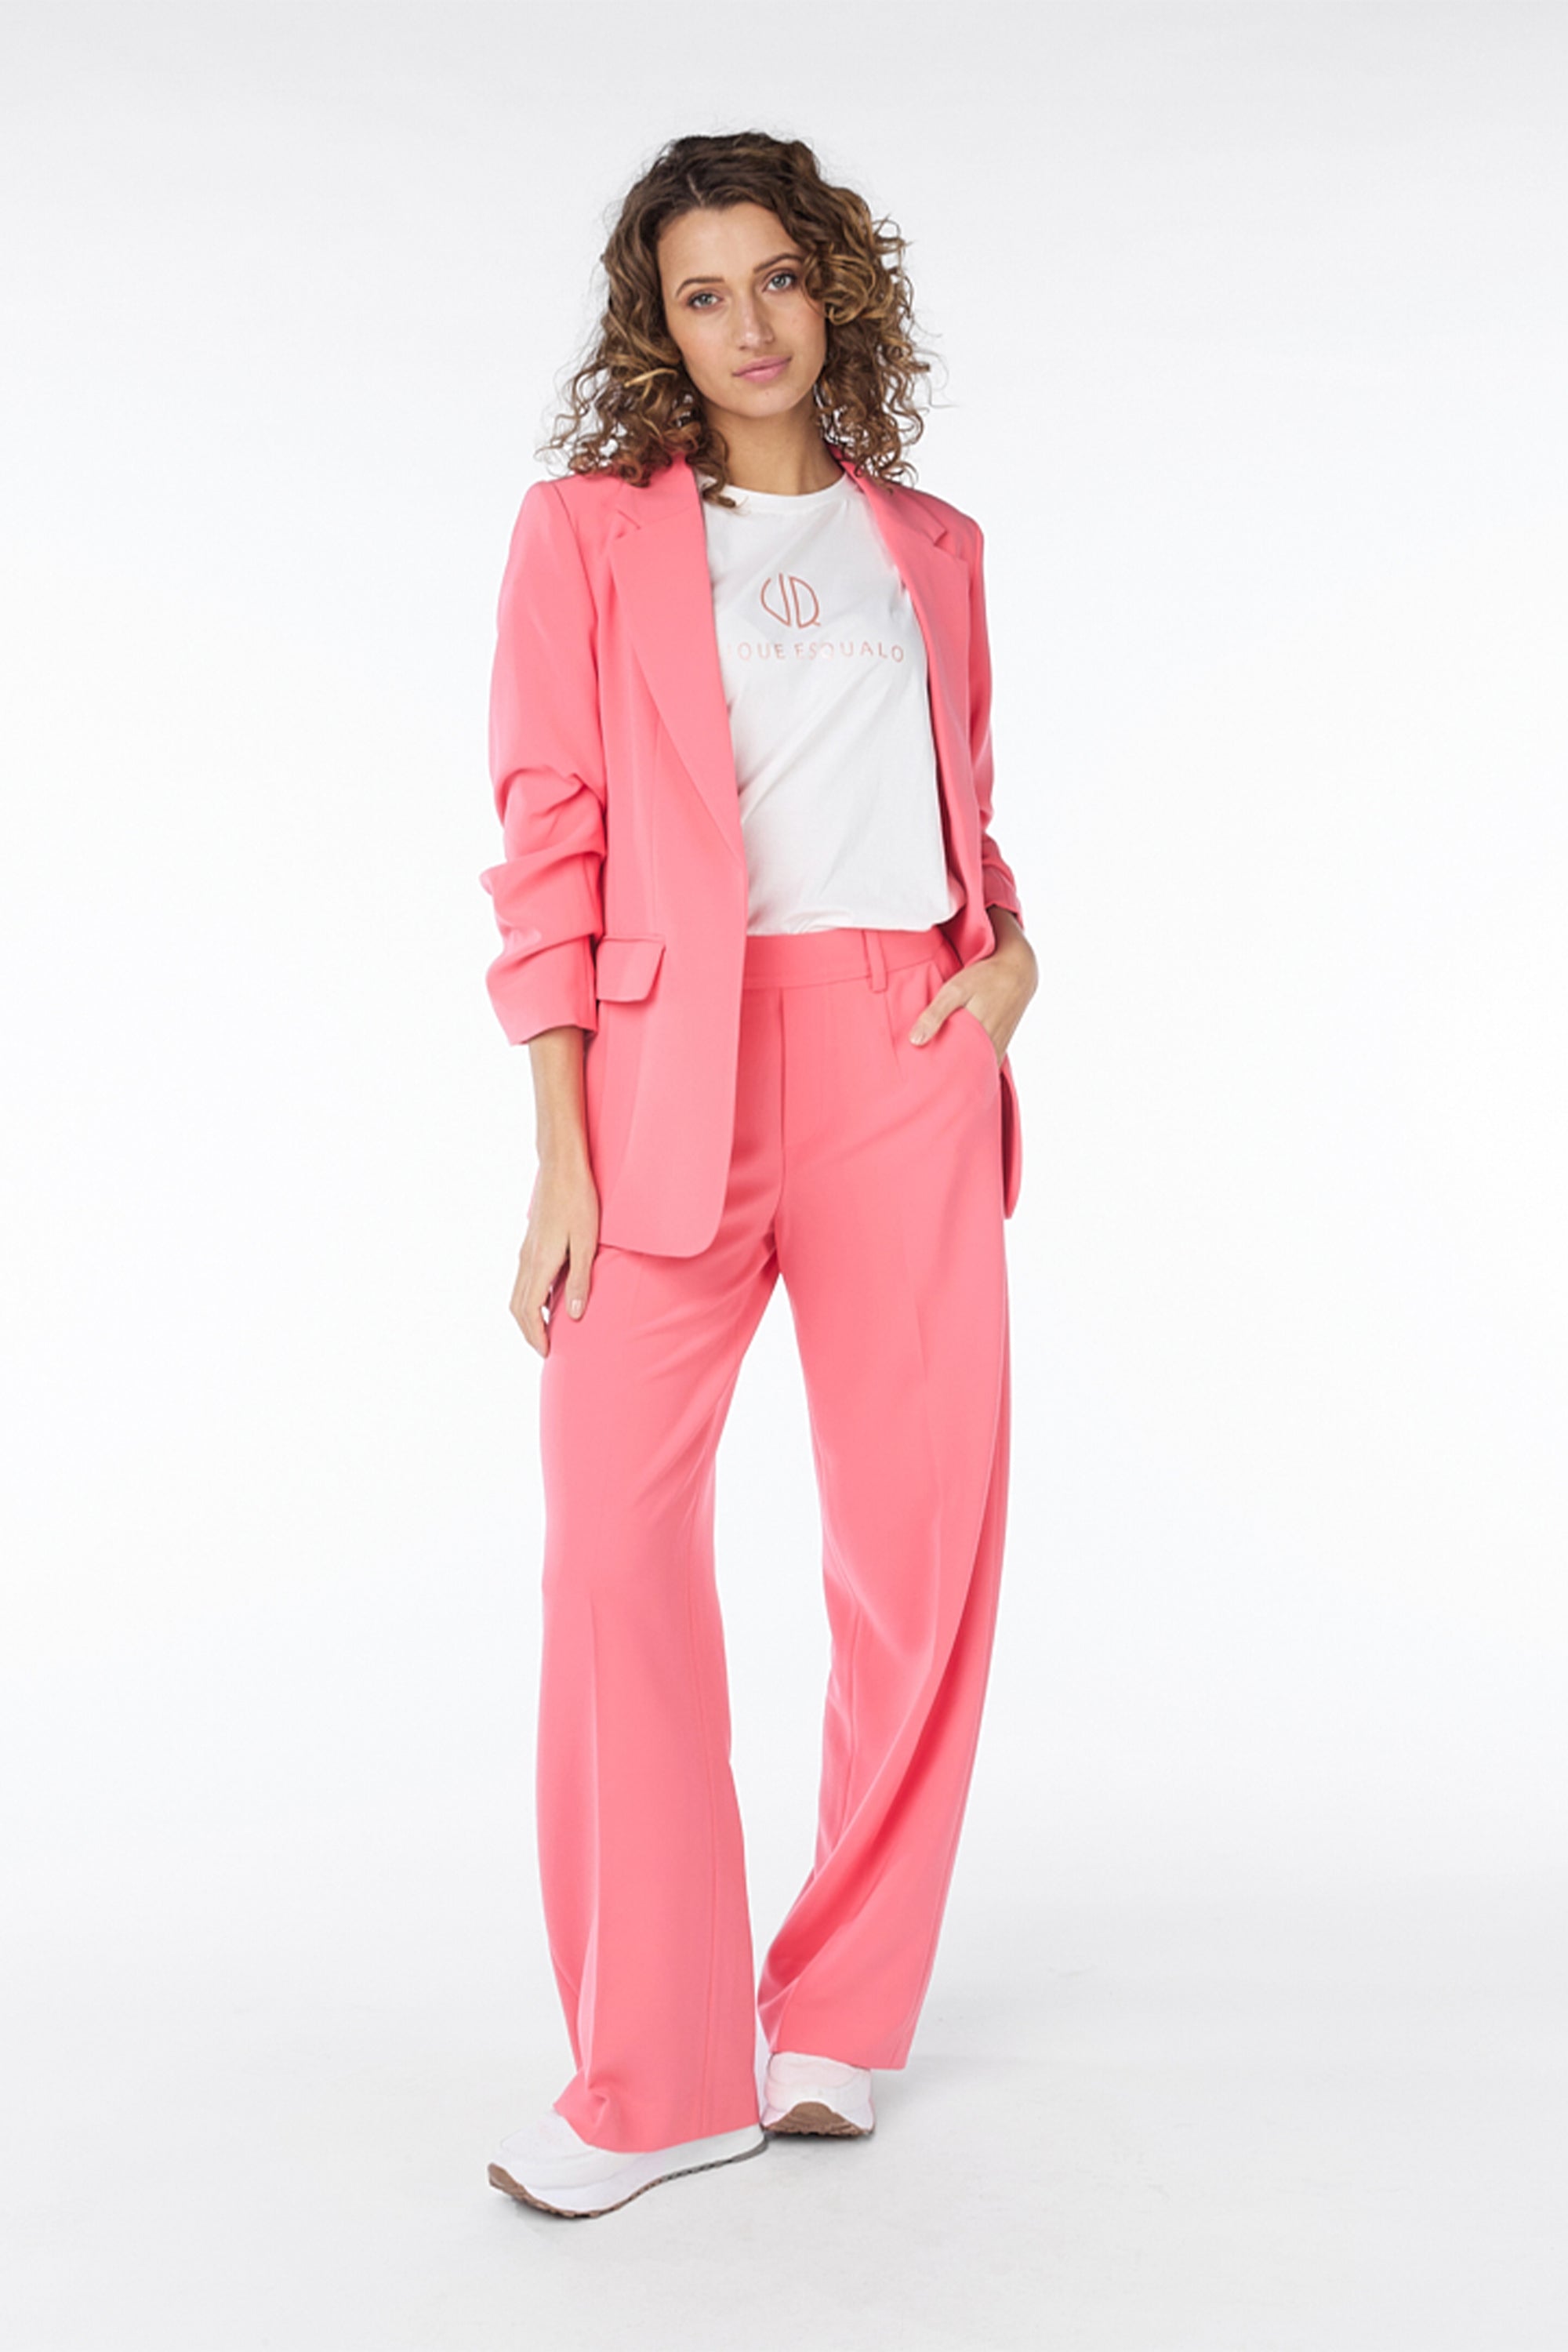 Esqulao (SP2410023) Women's Ruched 3/4 Sleeve Open Front Blazer with Flap Pockets in Strawberry Pink